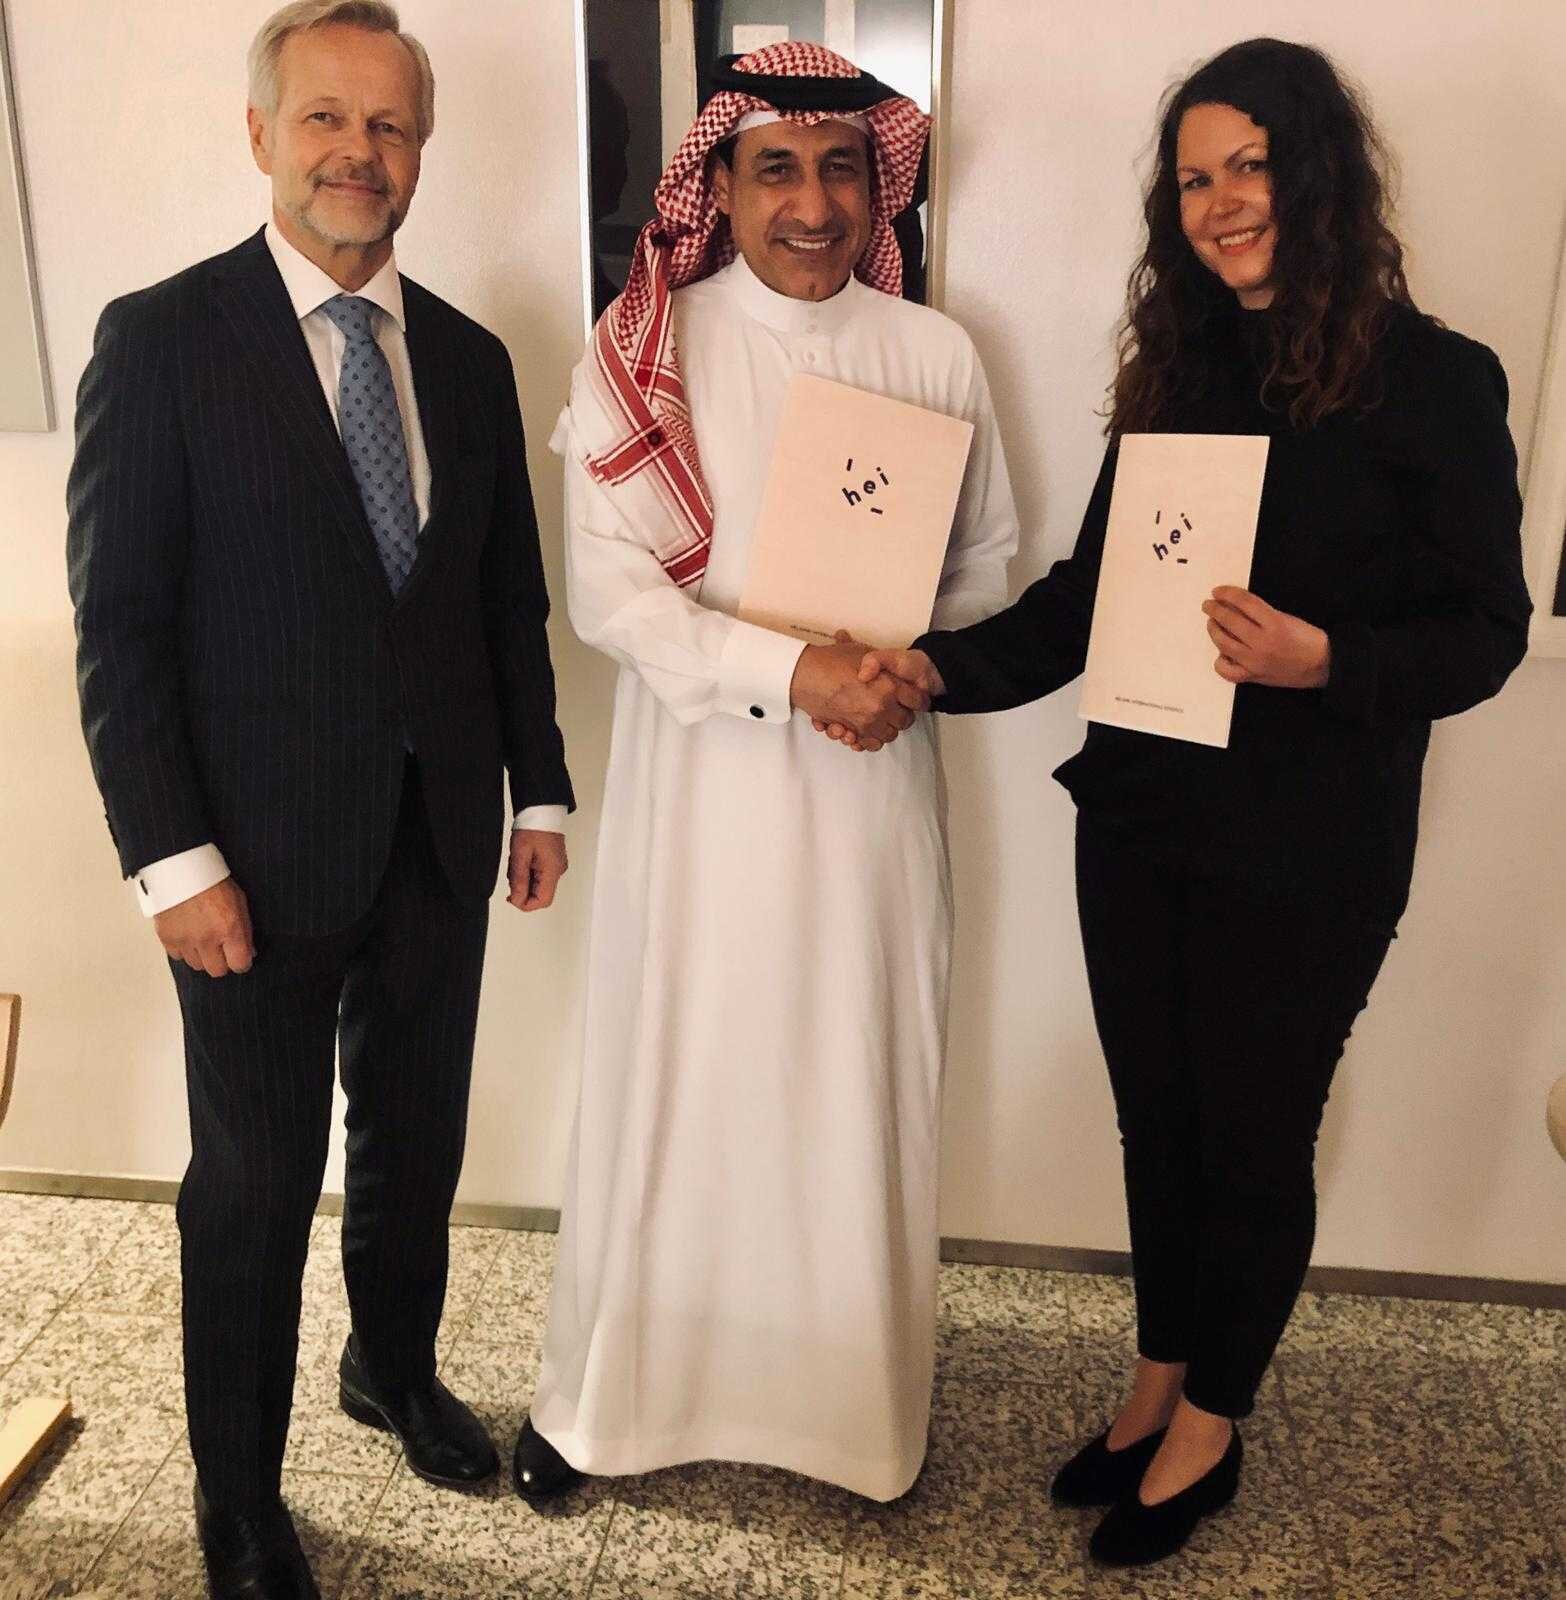 Antti Rytövuori, the Ambassador of Finland in Riyadh (left) hosted the signing of HEI Schools Jeddah and Dammam at the Finnish Embassy in Riyadh, Saudi Arabia on Tuesday, October 29th, 2019.